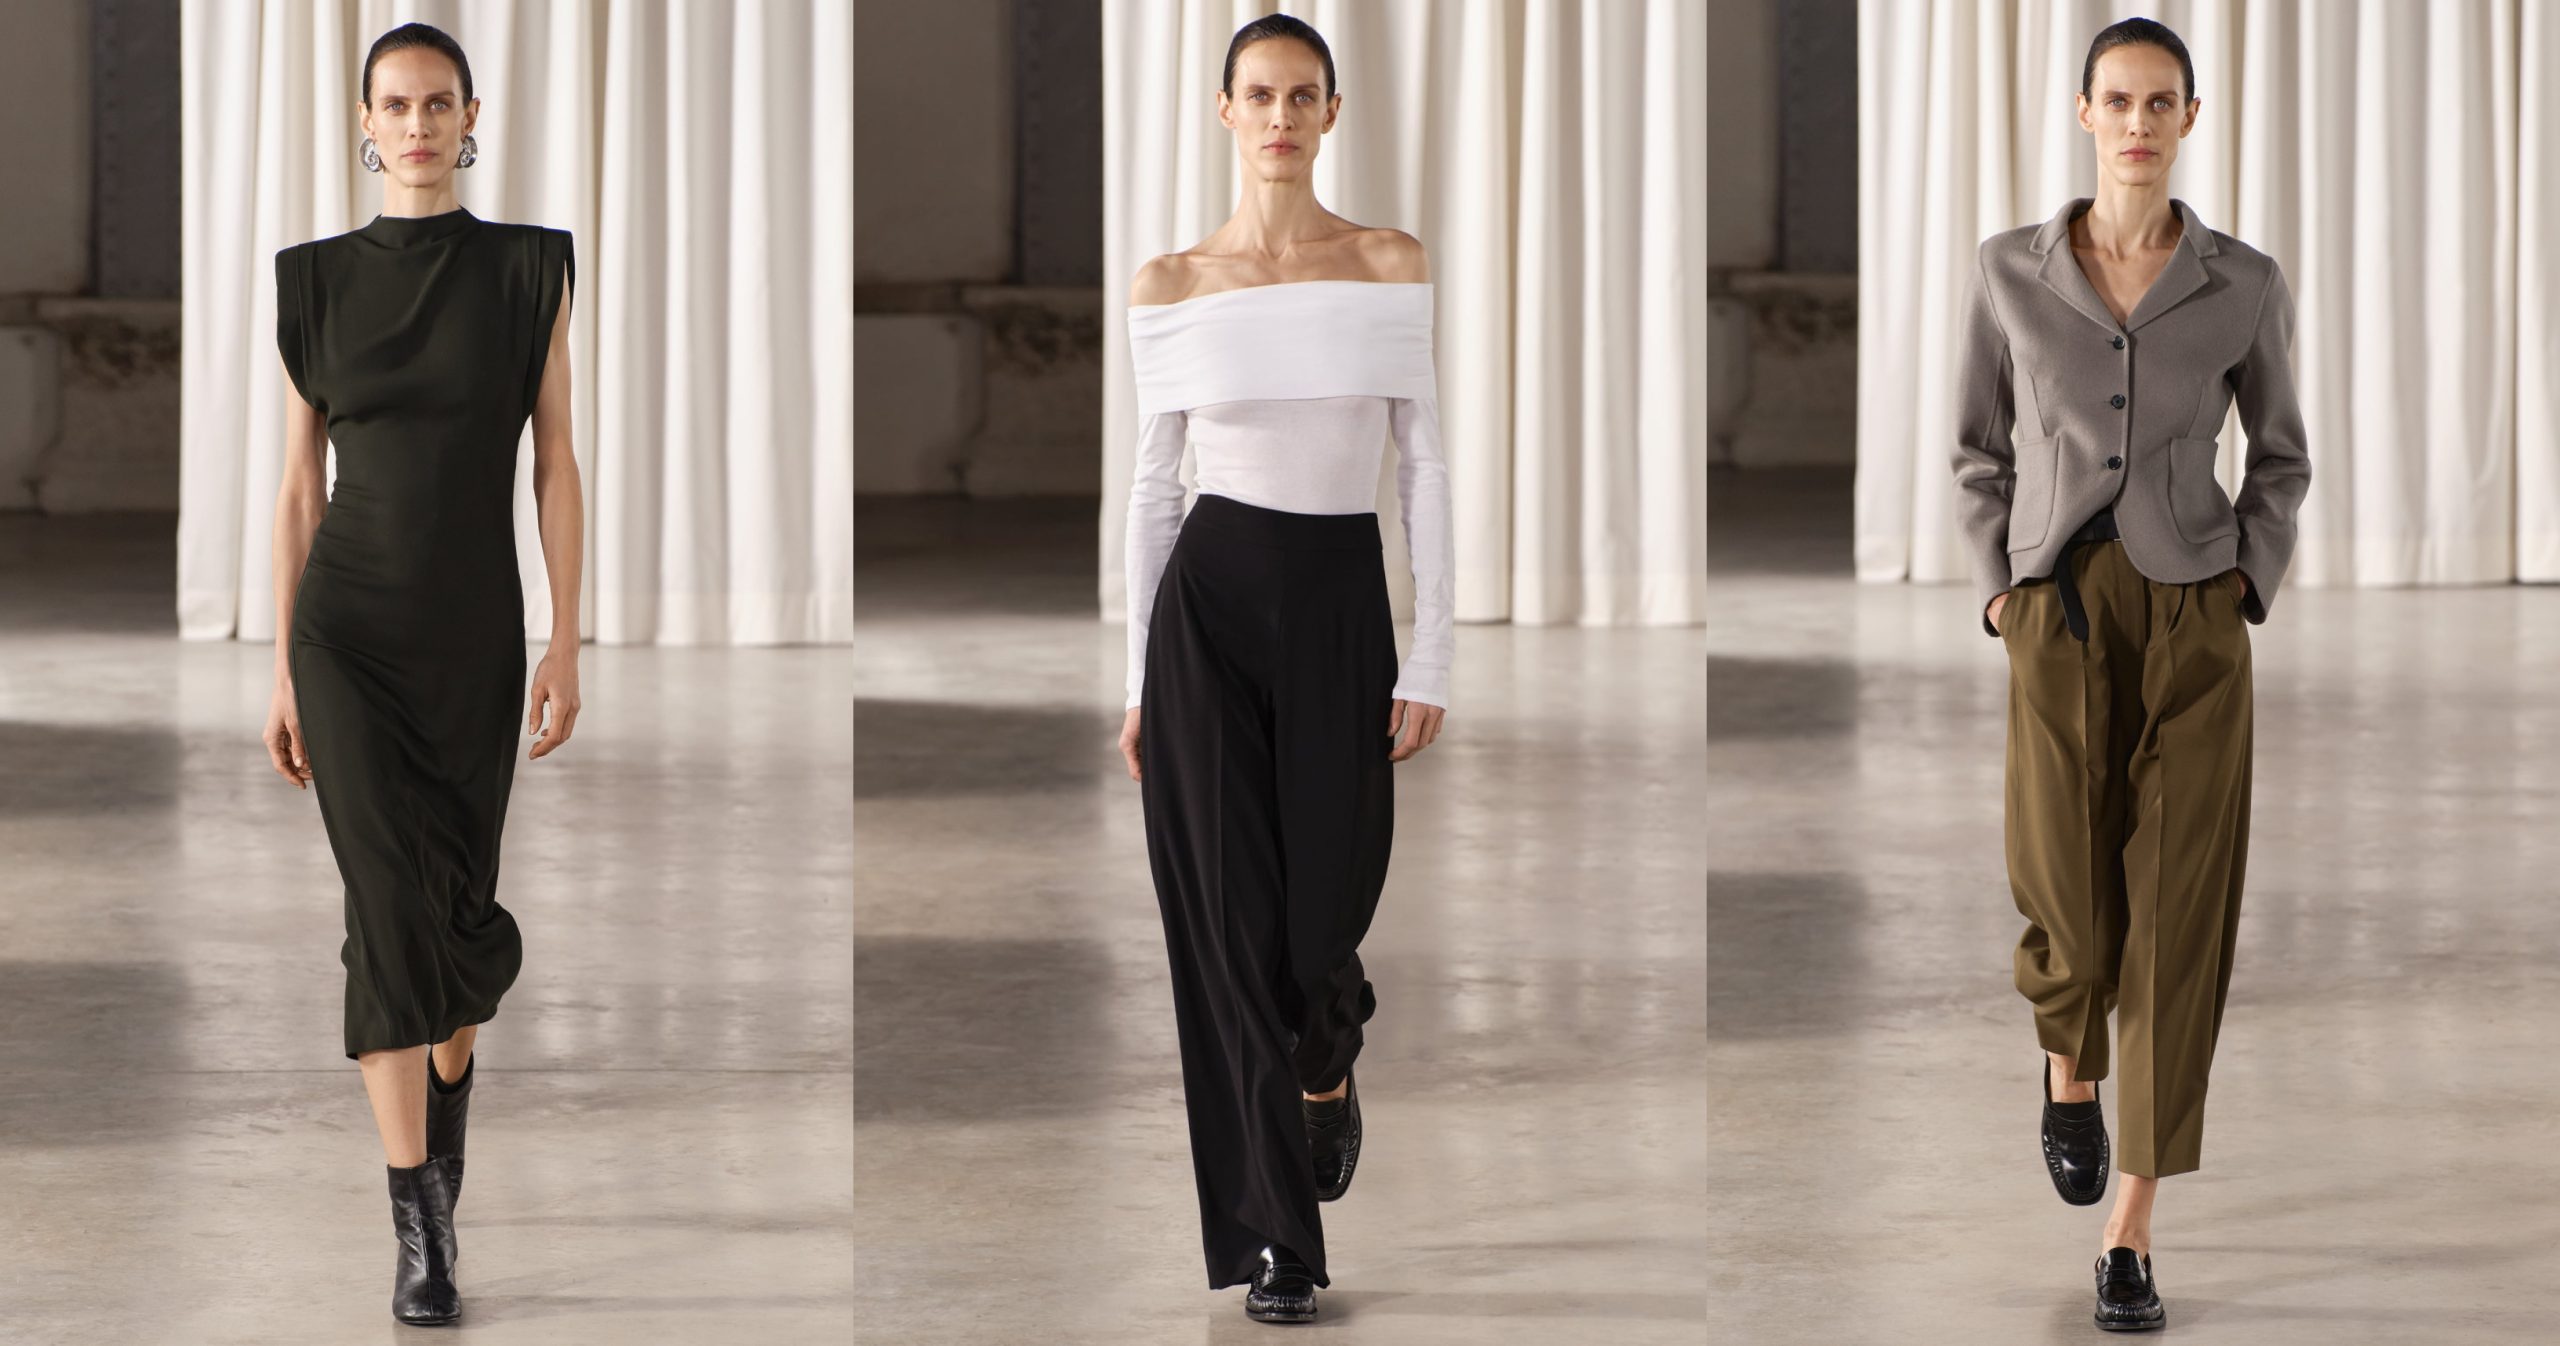 ZARA's newest, sophisticated collection for women - USA2GEORGIA NEWS Portal